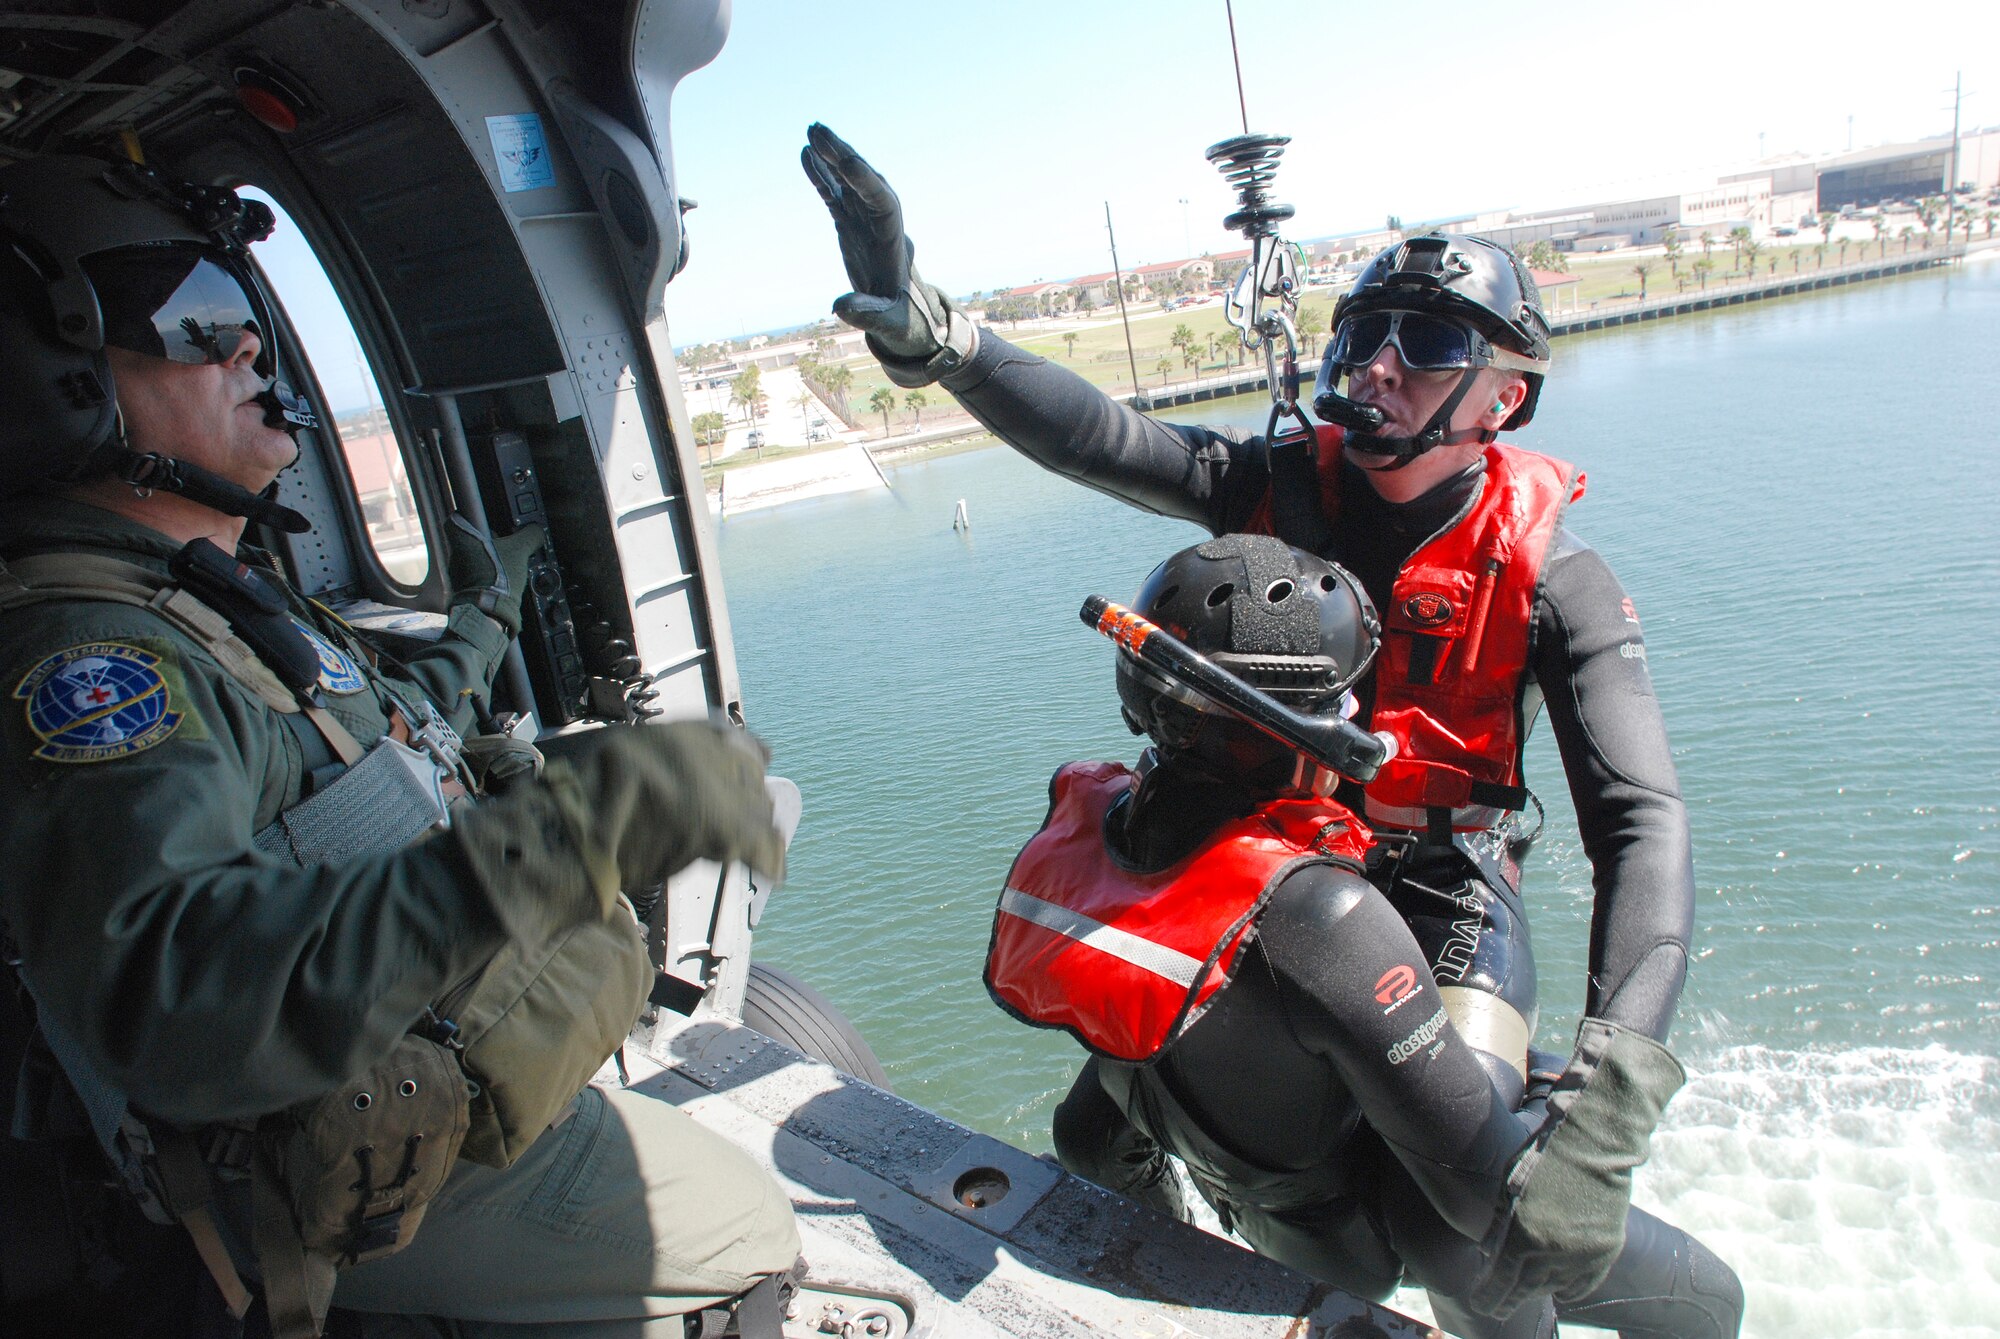 PATRICK AIR FORCE BASE, Fla. -  Chief Master Sgt. Lazaro Ibarra (left) helicopter flight engineer, 301st Rescue Squadron here, hoists Capt. Niul Manske, combat rescue officer, and Staff Sgt. Carl Jensen, both pararescumen from the 304th Rescue Squadron, Portland, Ore., from the Banana River into this HH-60G Pave Hawk helicopter during water-rescue training near Patrick Air Force Base. The two-man hoists are a small part of the overall training for the PJs. The 304th RQS is a geographically separated unit of the 920th RQW. The Portland PJs normally specialize in snow-capped mountain rescues whereas here the mountain men are getting a dose of warm salty air. All of these men are Air Force Reservists with the 920th Rescue Wing.  (U.S. Air Force photo/Staff Sgt. Leslie Kraushaar)